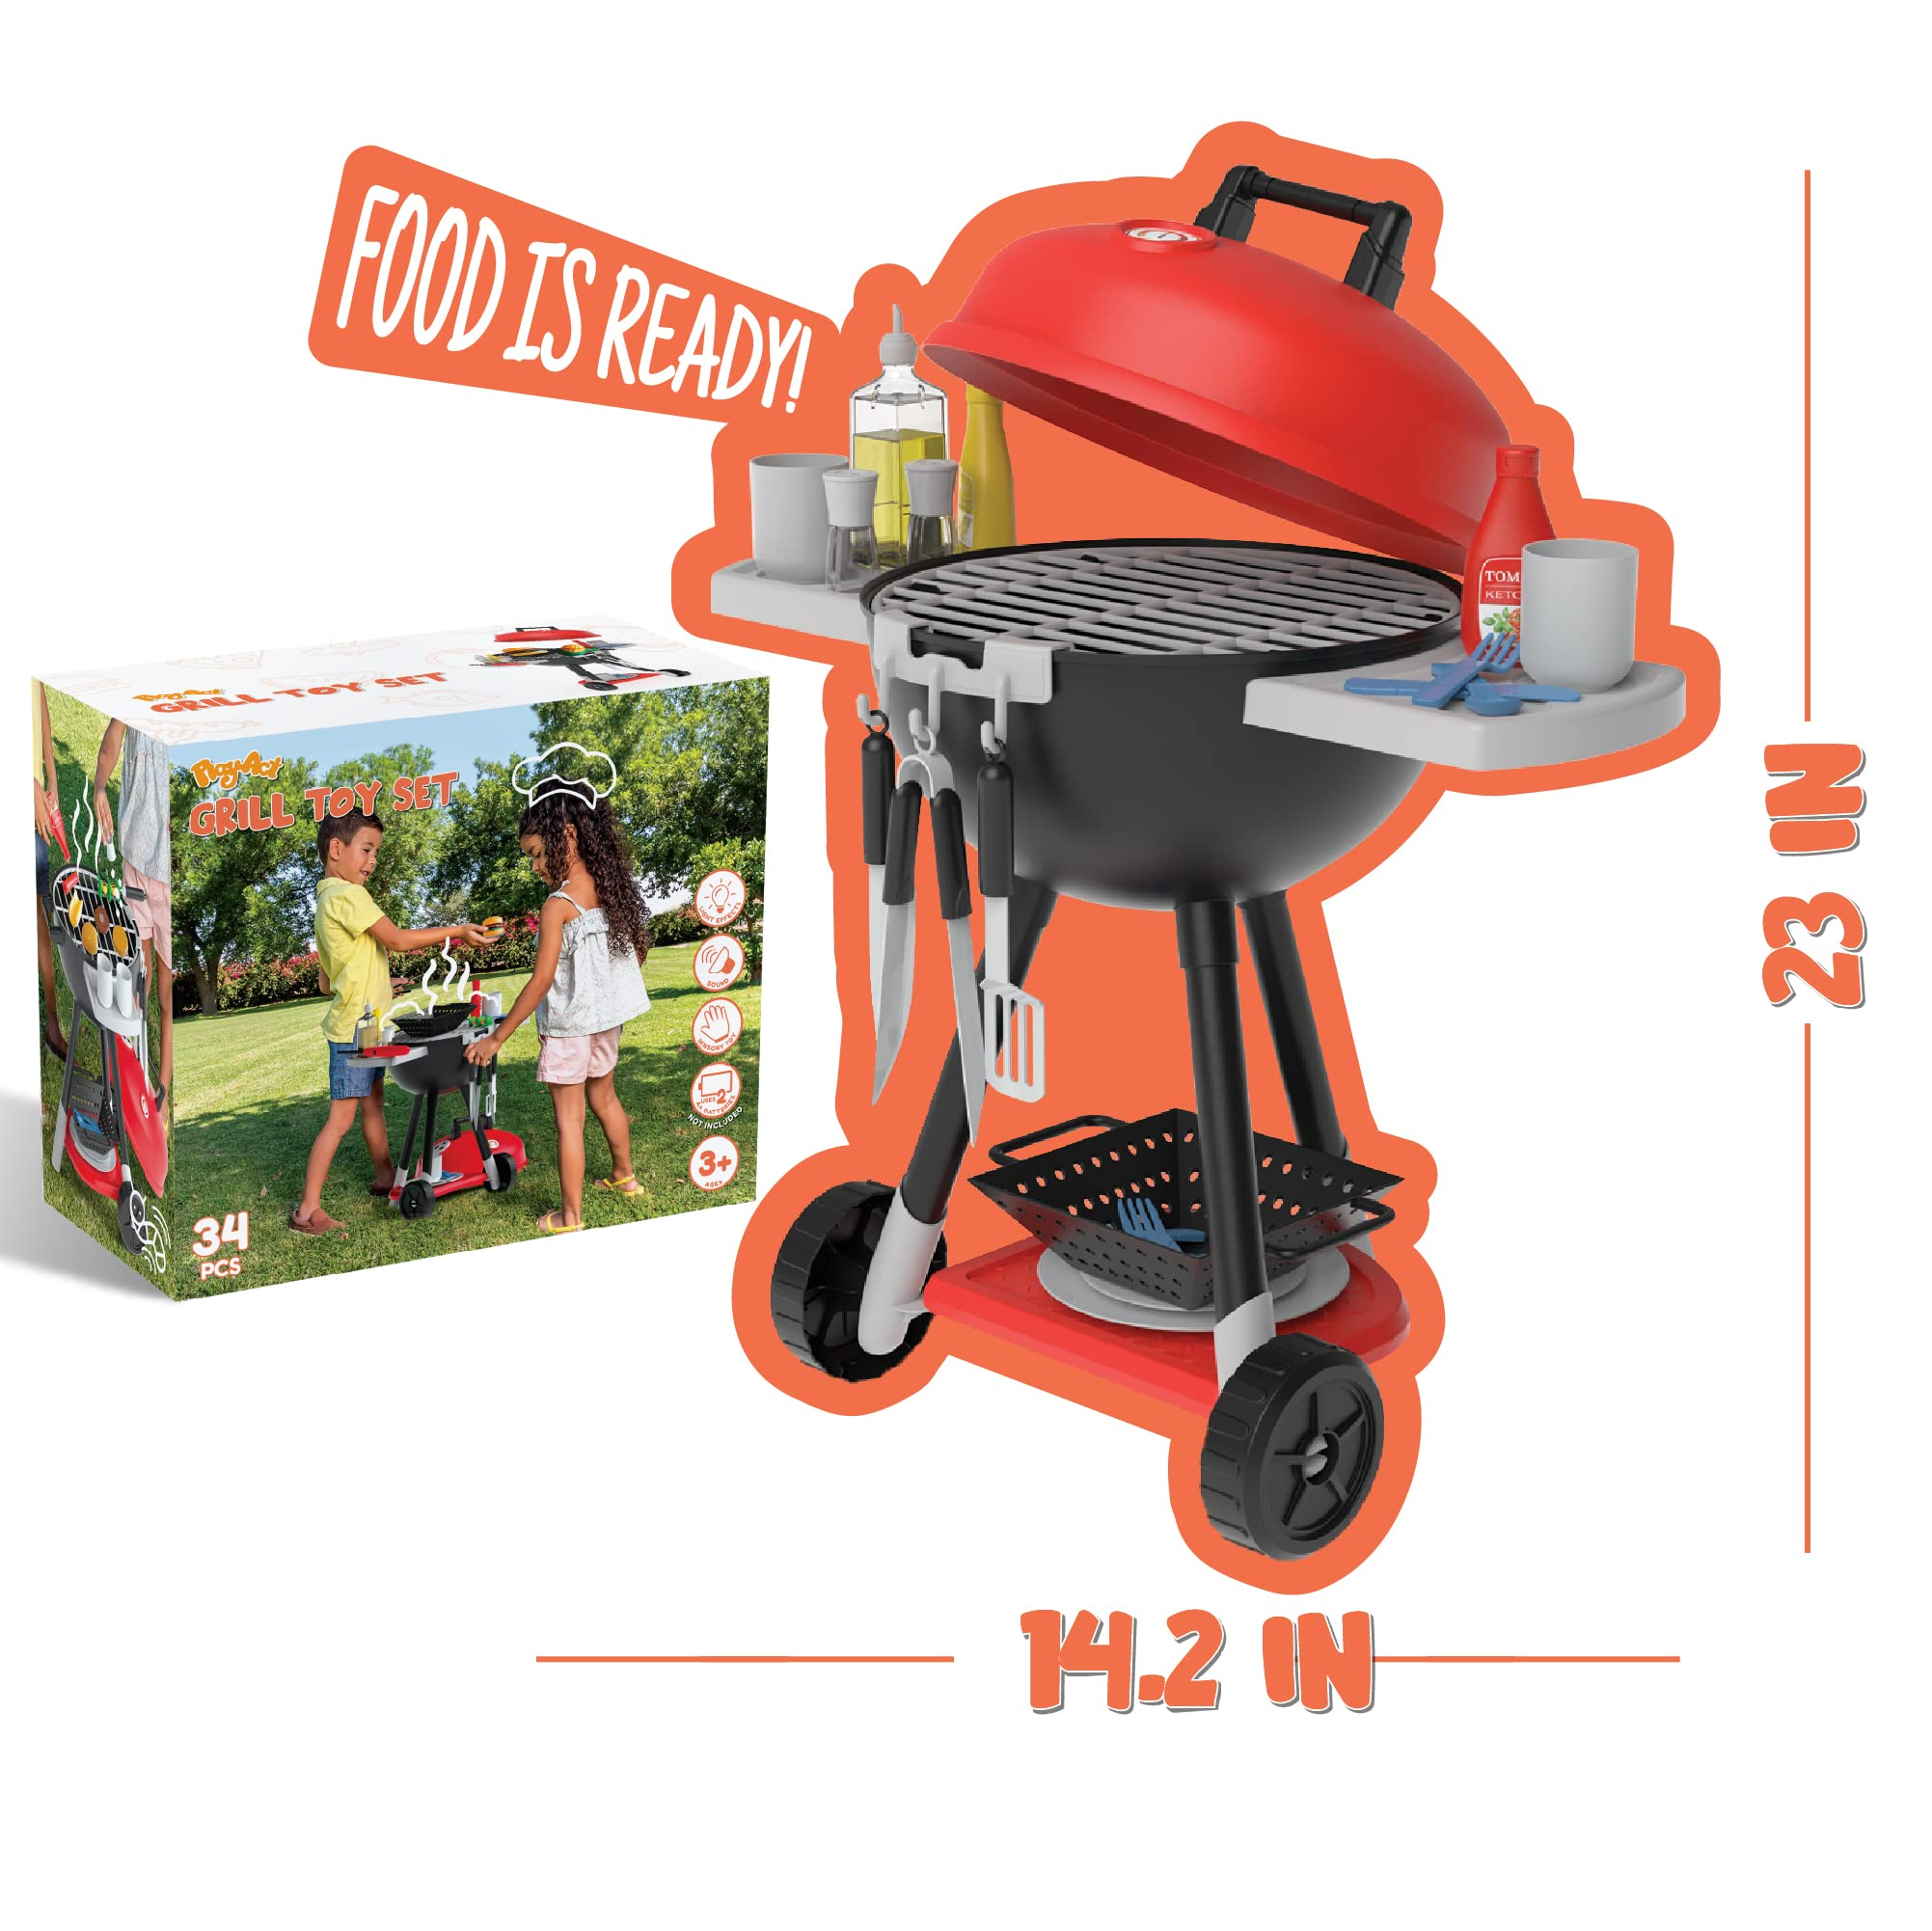 Portable Charcoal Grill Toy Set